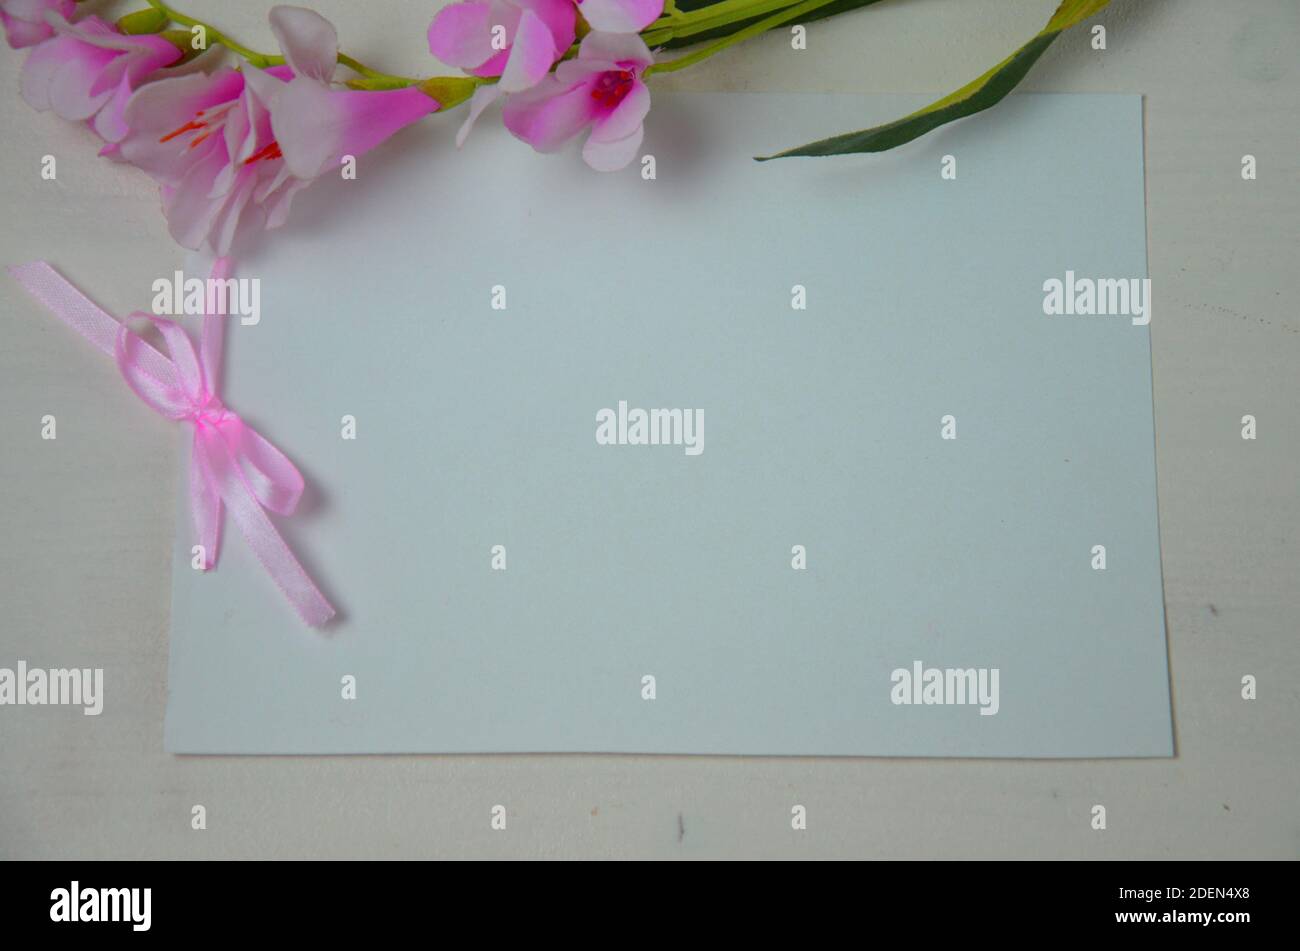 Spring flowers. Pink flowers on white wooden background. Flat lay, top view. Blank white greeting card paper, empty sheet of paper and pink ribbon Stock Photo